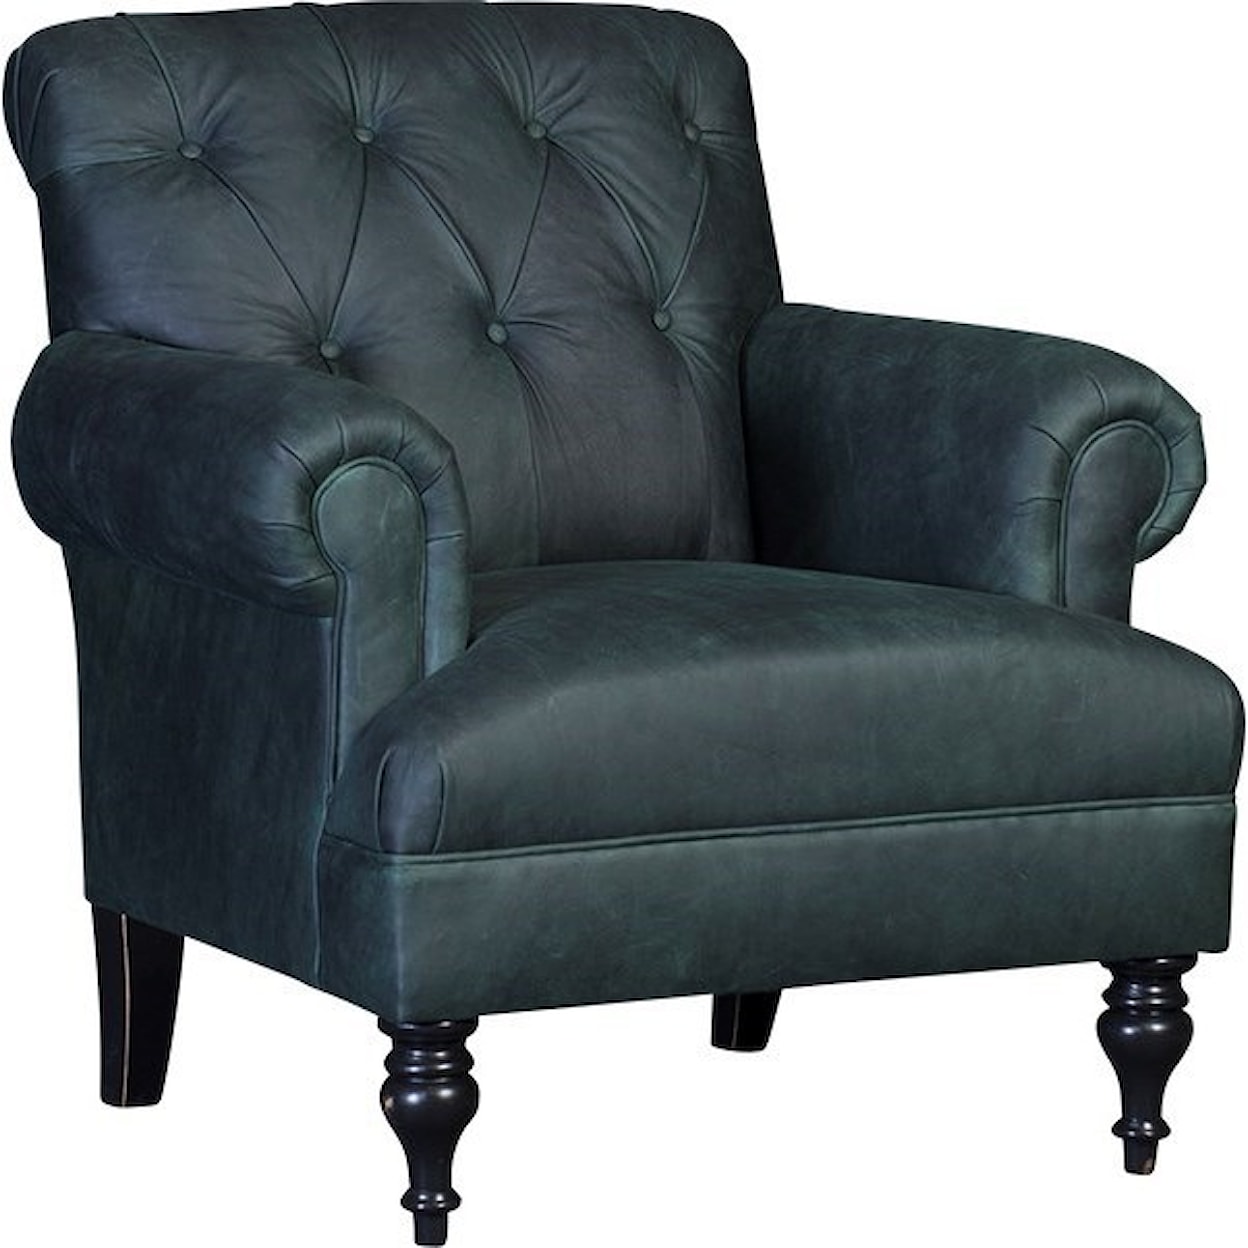 Mayo 3419 Tufted Back Chair